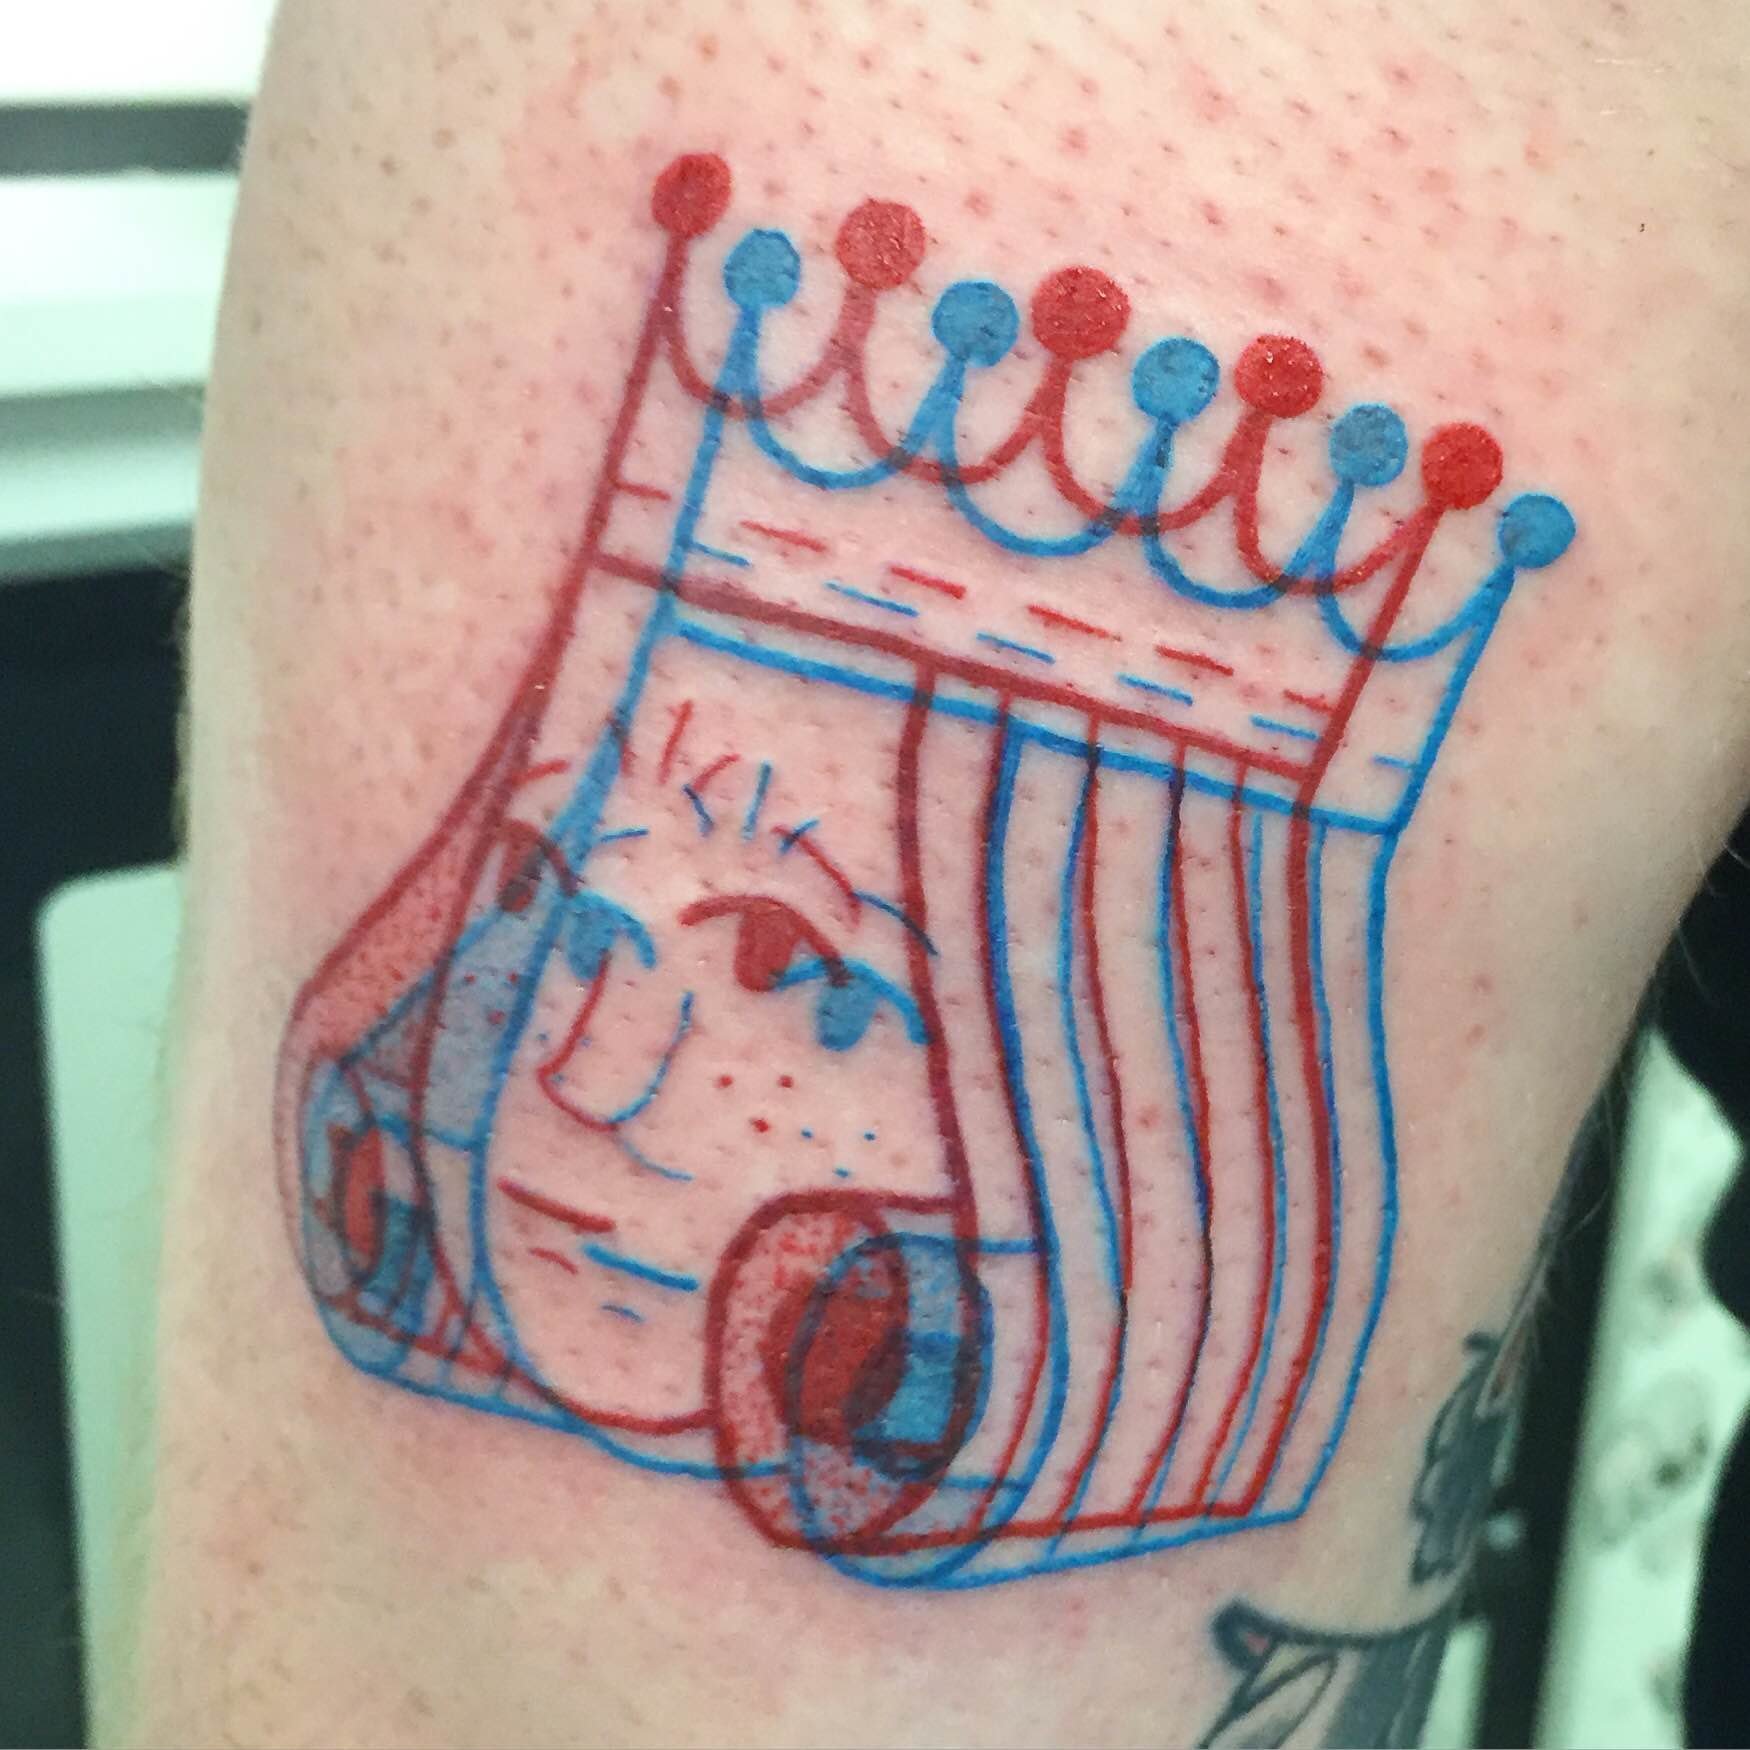 Tattoo uploaded by Xavier • Anaglyph tattoos by Marcus Yuen. #MarcusYuen # anaglyph #3d #crown #logo #leica #camera • Tattoodo